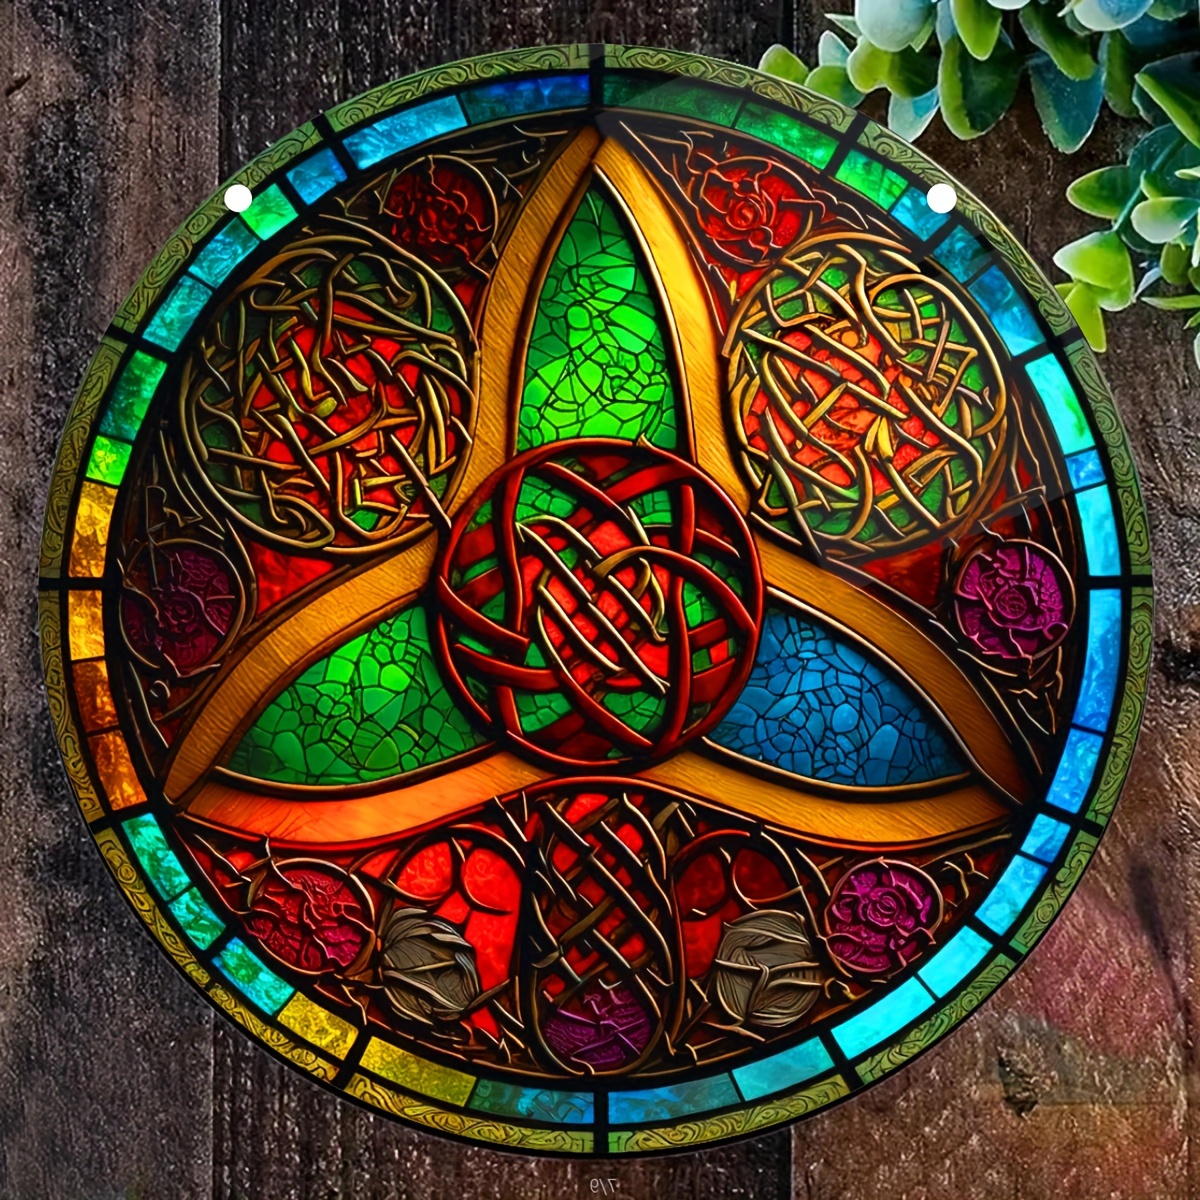 Celtic Trinity Knot Stained Glass Window Hanging Irish Decor Bedroom Living  Room Kitchen AS1164 - Suncatchers & Mobiles - Los Angeles, California, Facebook Marketplace